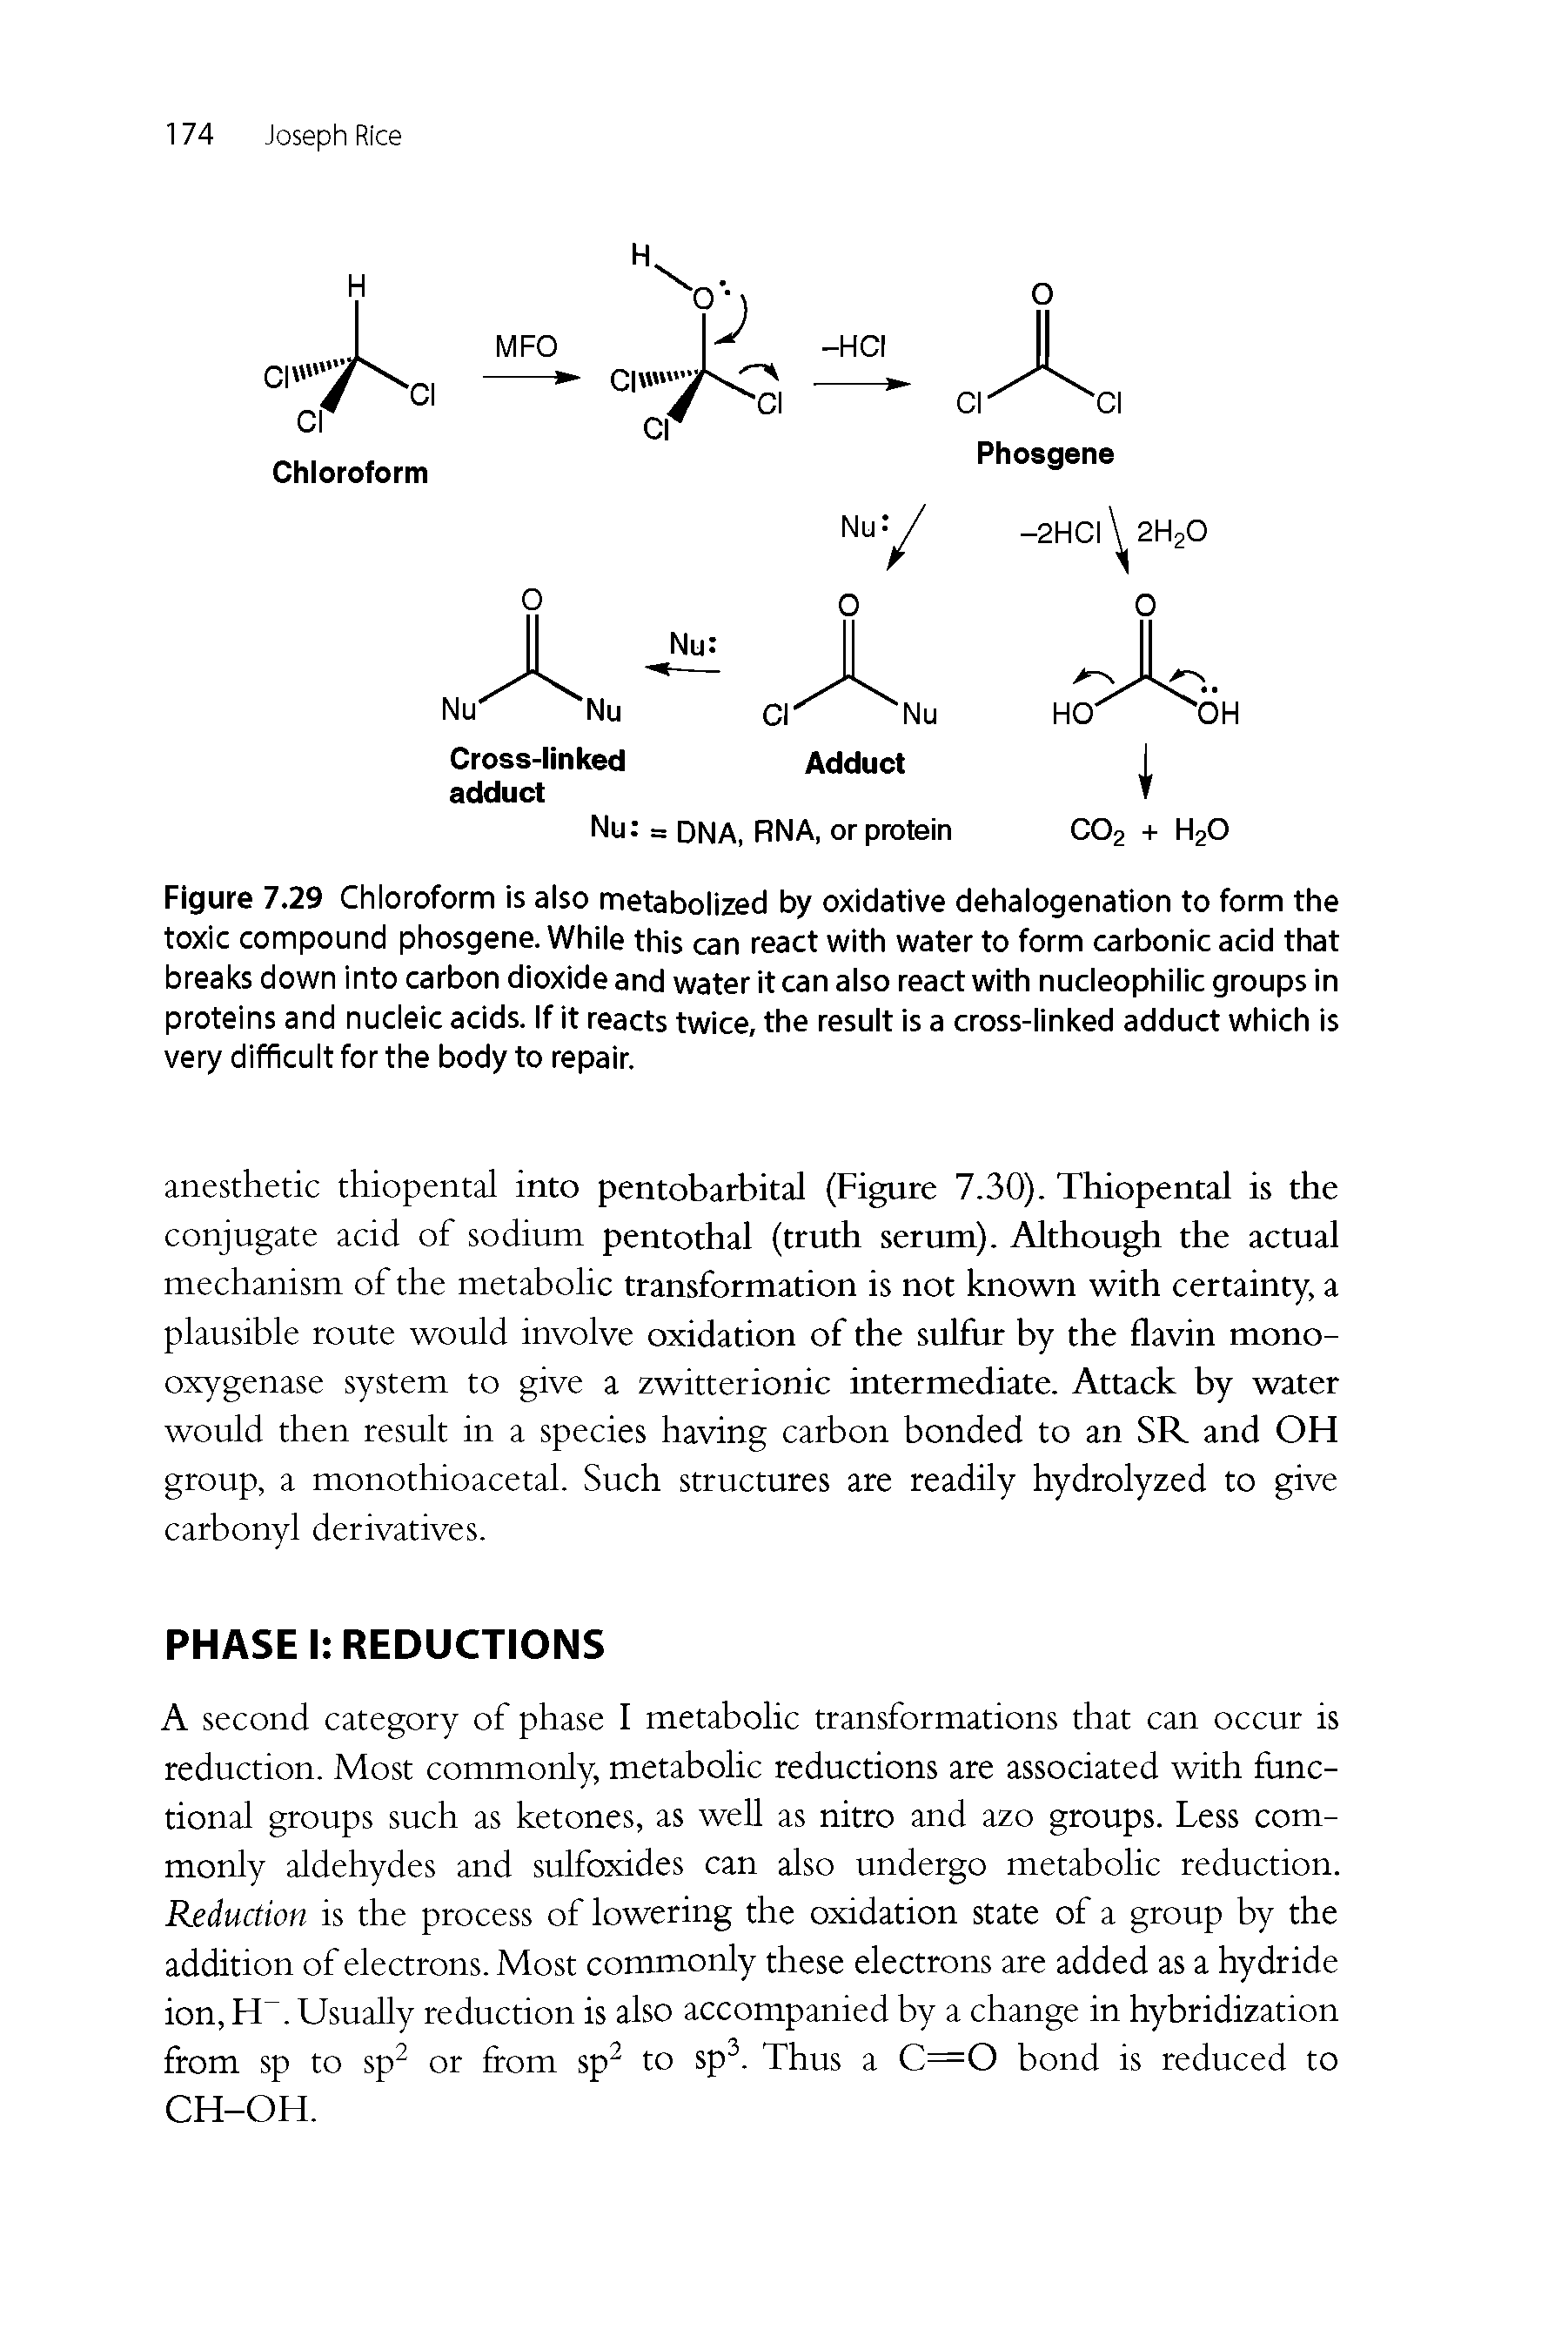 Figure 7.29 Chloroform is also metabolized by oxidative dehalogenation to form the toxic compound phosgene. While this can react with water to form carbonic acid that breaks down into carbon dioxide and water it can also react with nucleophilic groups in proteins and nucieic acids. If it reacts twice, the result is a cross-linked adduct which is very difficult for the body to repair.